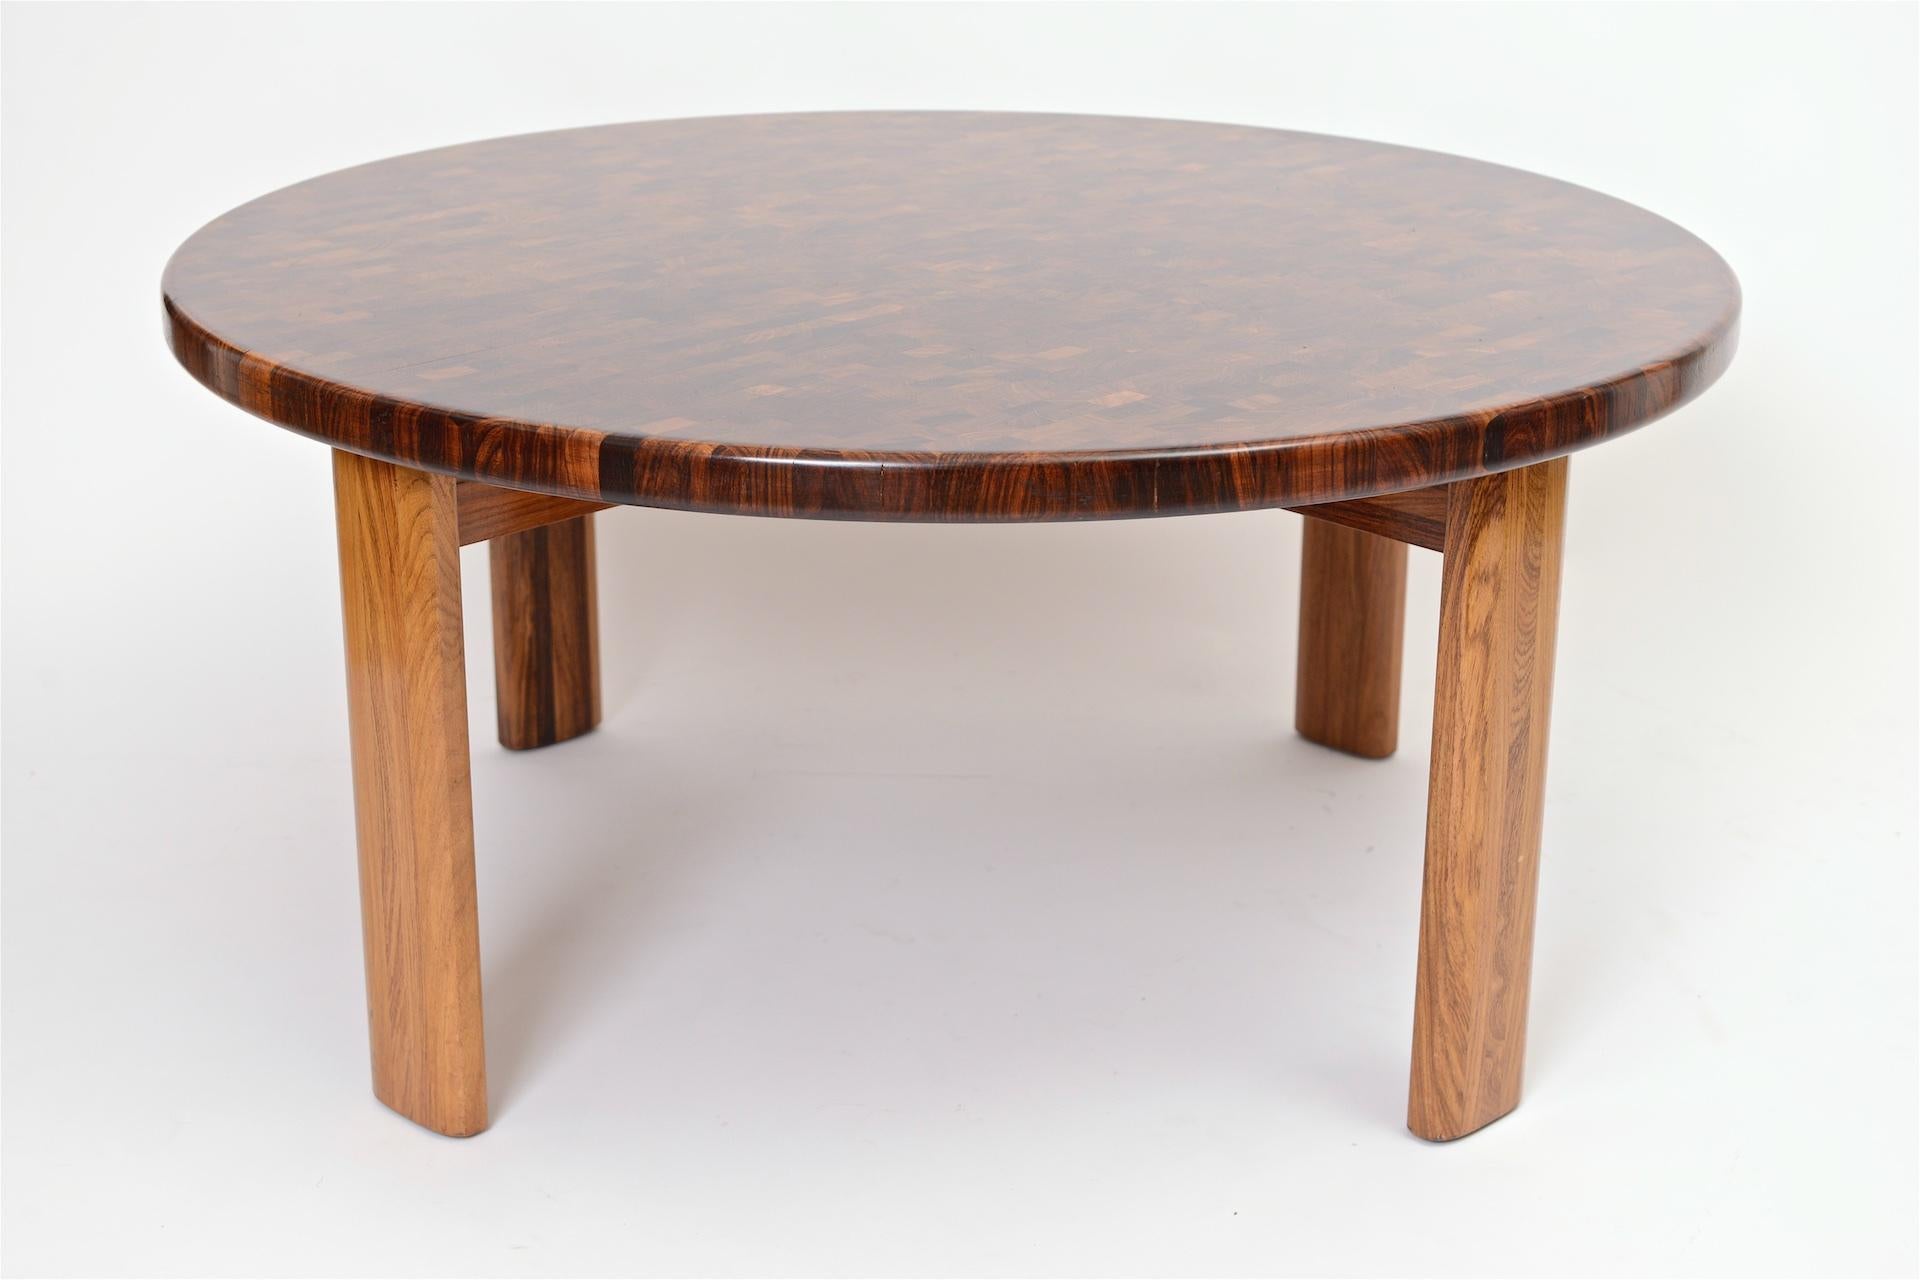 Good quality circular coffee table from Denmark c1960

Rosewood and walnut.

       